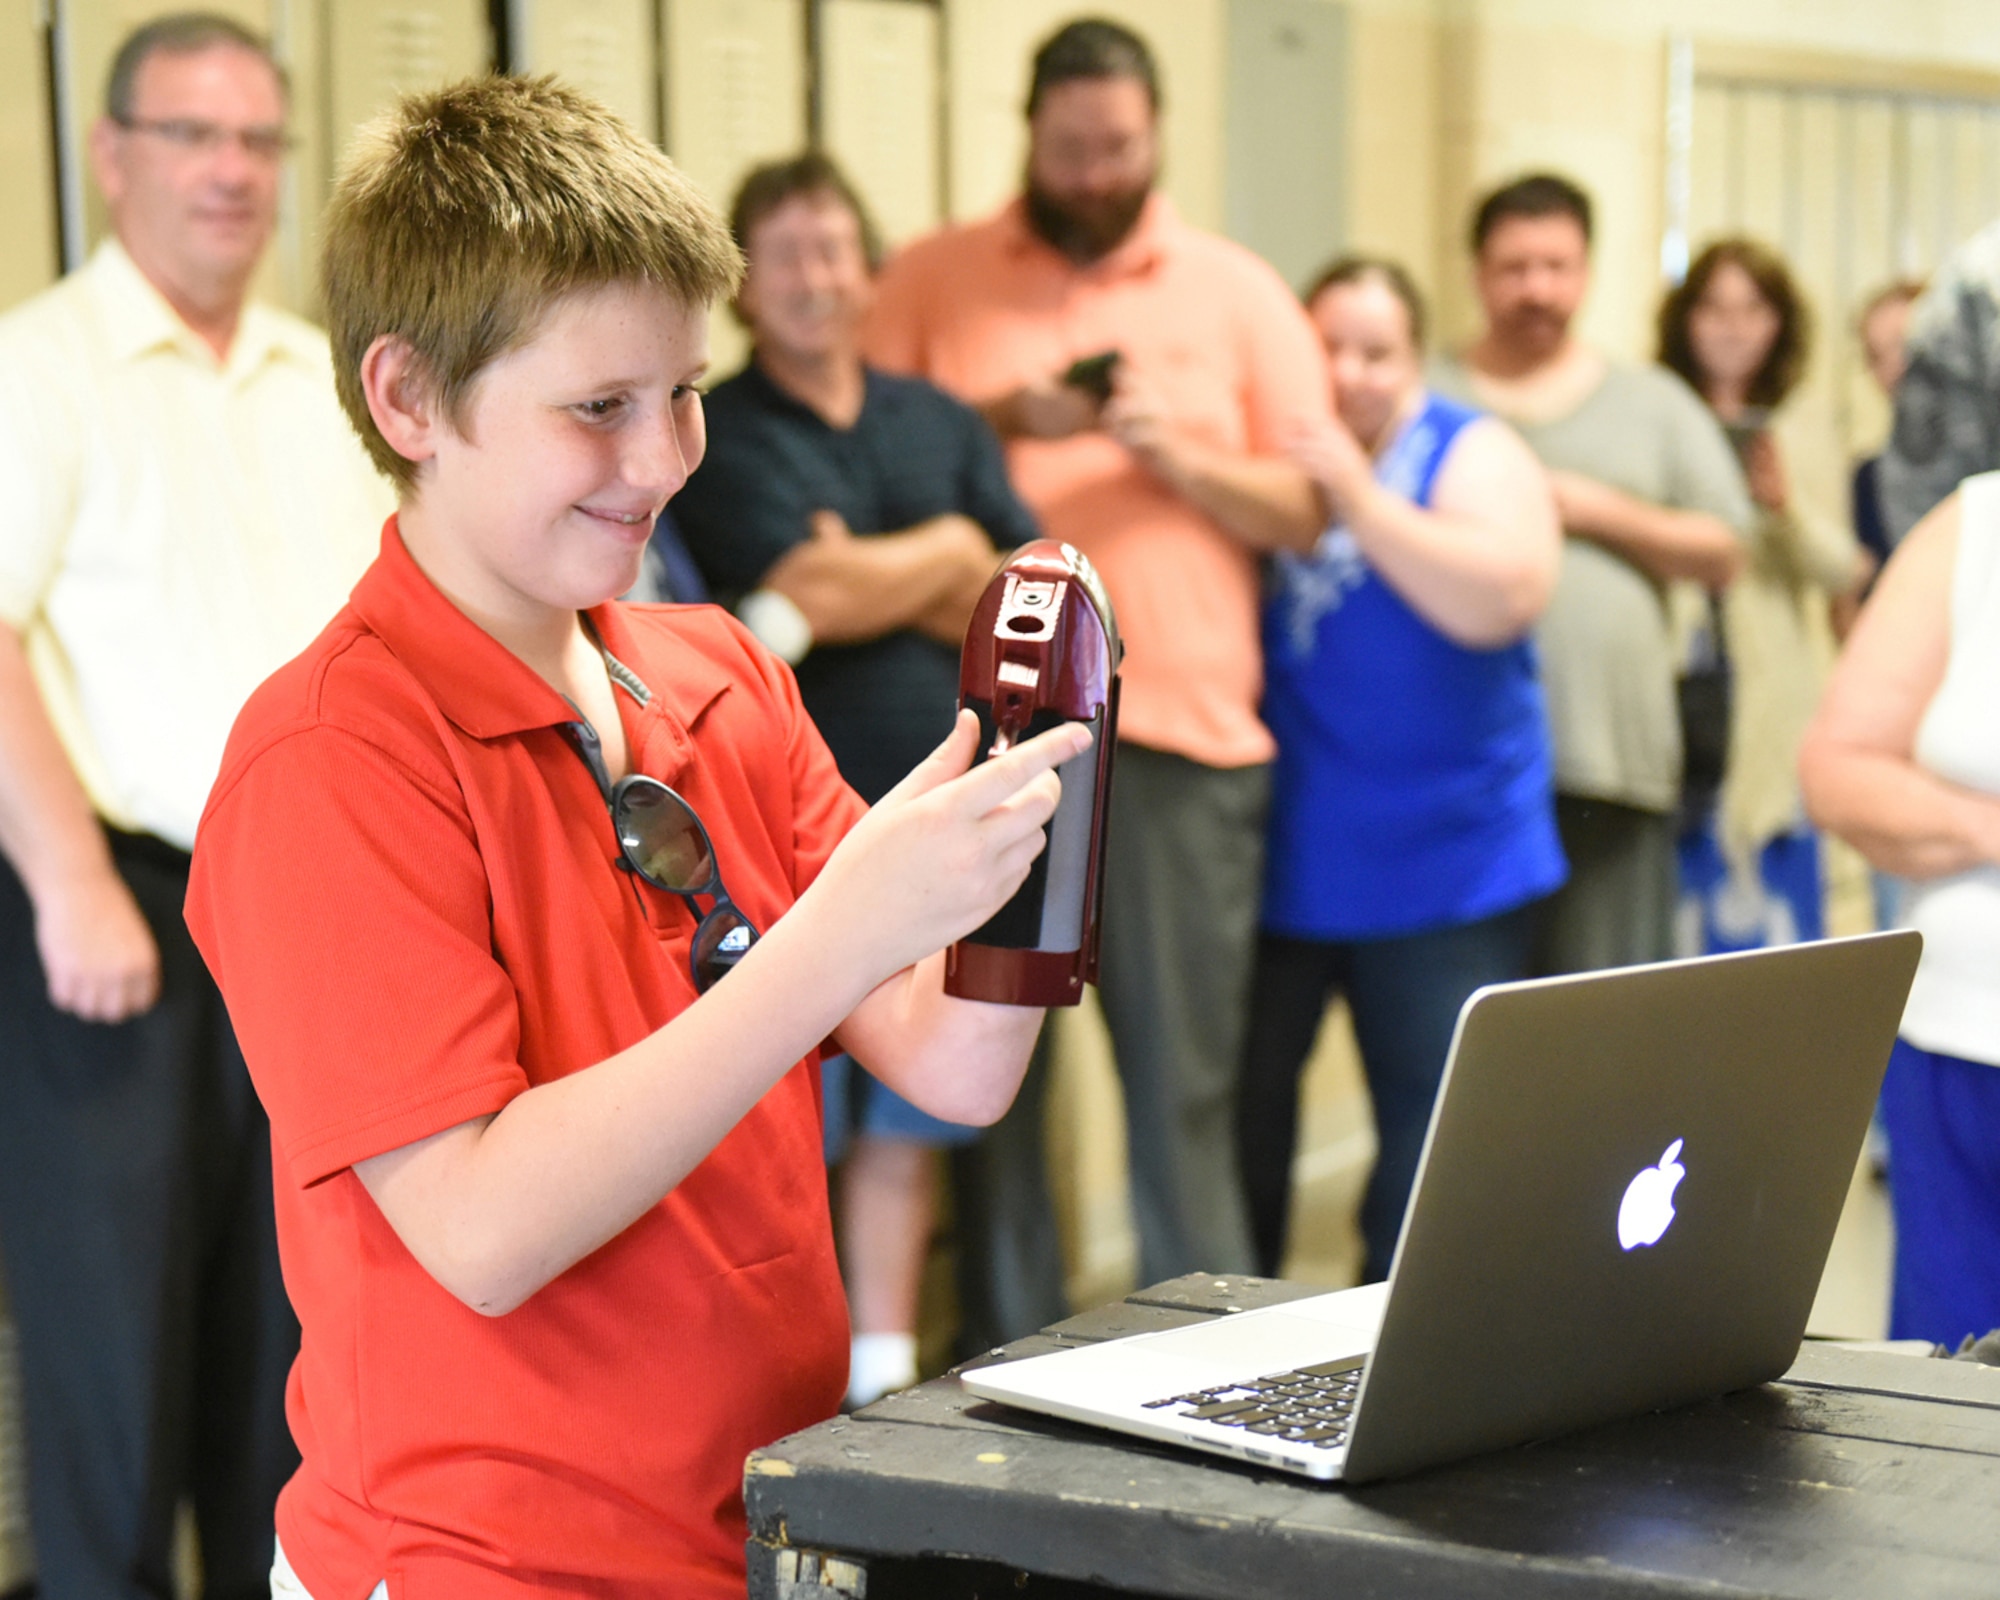 Andrew (A.J.) Mindy shows his mother, Senior Master Sgt. Susan Mindy, a member of Joint Force Headquarters Pennsylvania National Guard, via Skype, his new prosthetic attachment that holds a drum stick, June 7, 2016 at the Pine Grove Area High School, Pine Grove, Penn.  With the ability to hold three attachments, the prosthetic was presented by a high school freshman Nick Brown, the designer of the 3D printed device.  Sgt. Mindy has been deployed for four months.  (U.S. Air National Guard photo by Master Sgt. Matt Schwartz/Released)